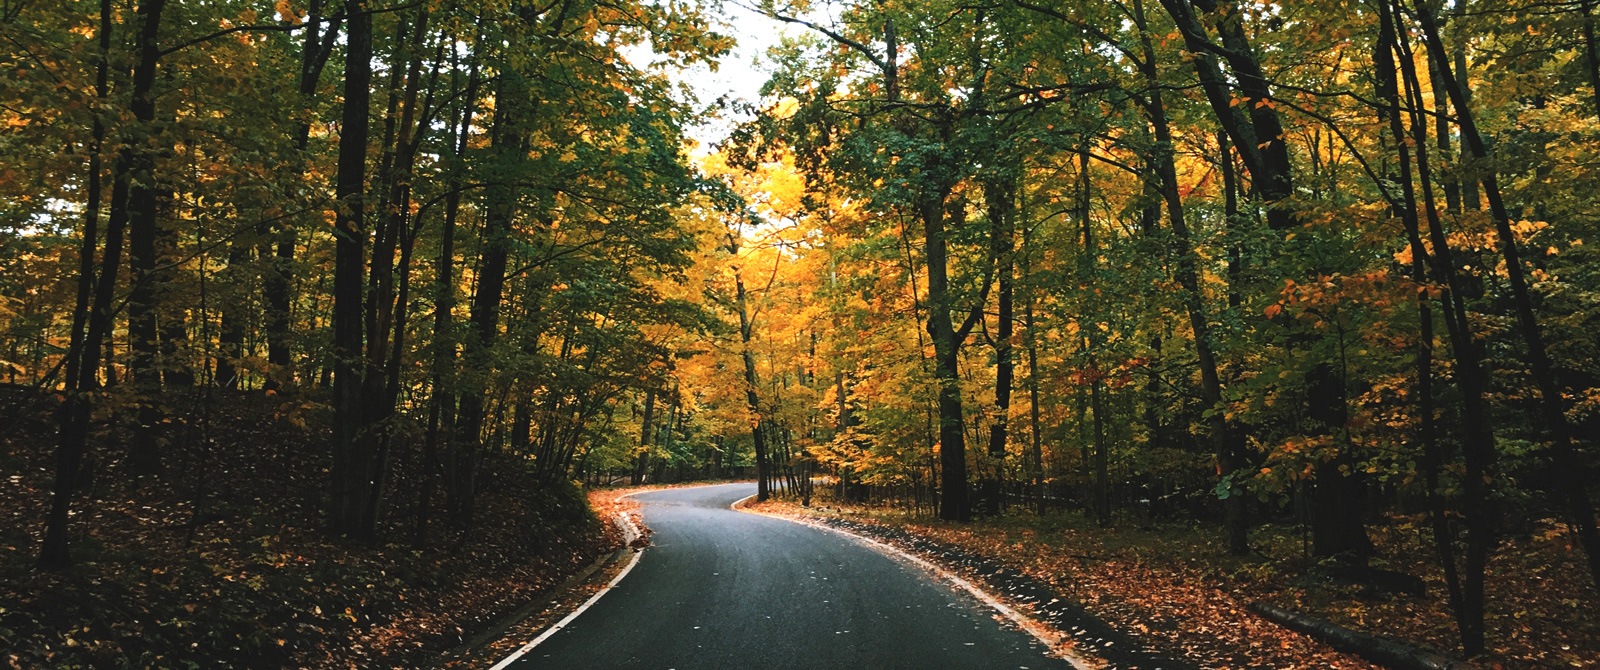 Landscape image of a narrow road with fall colored trees